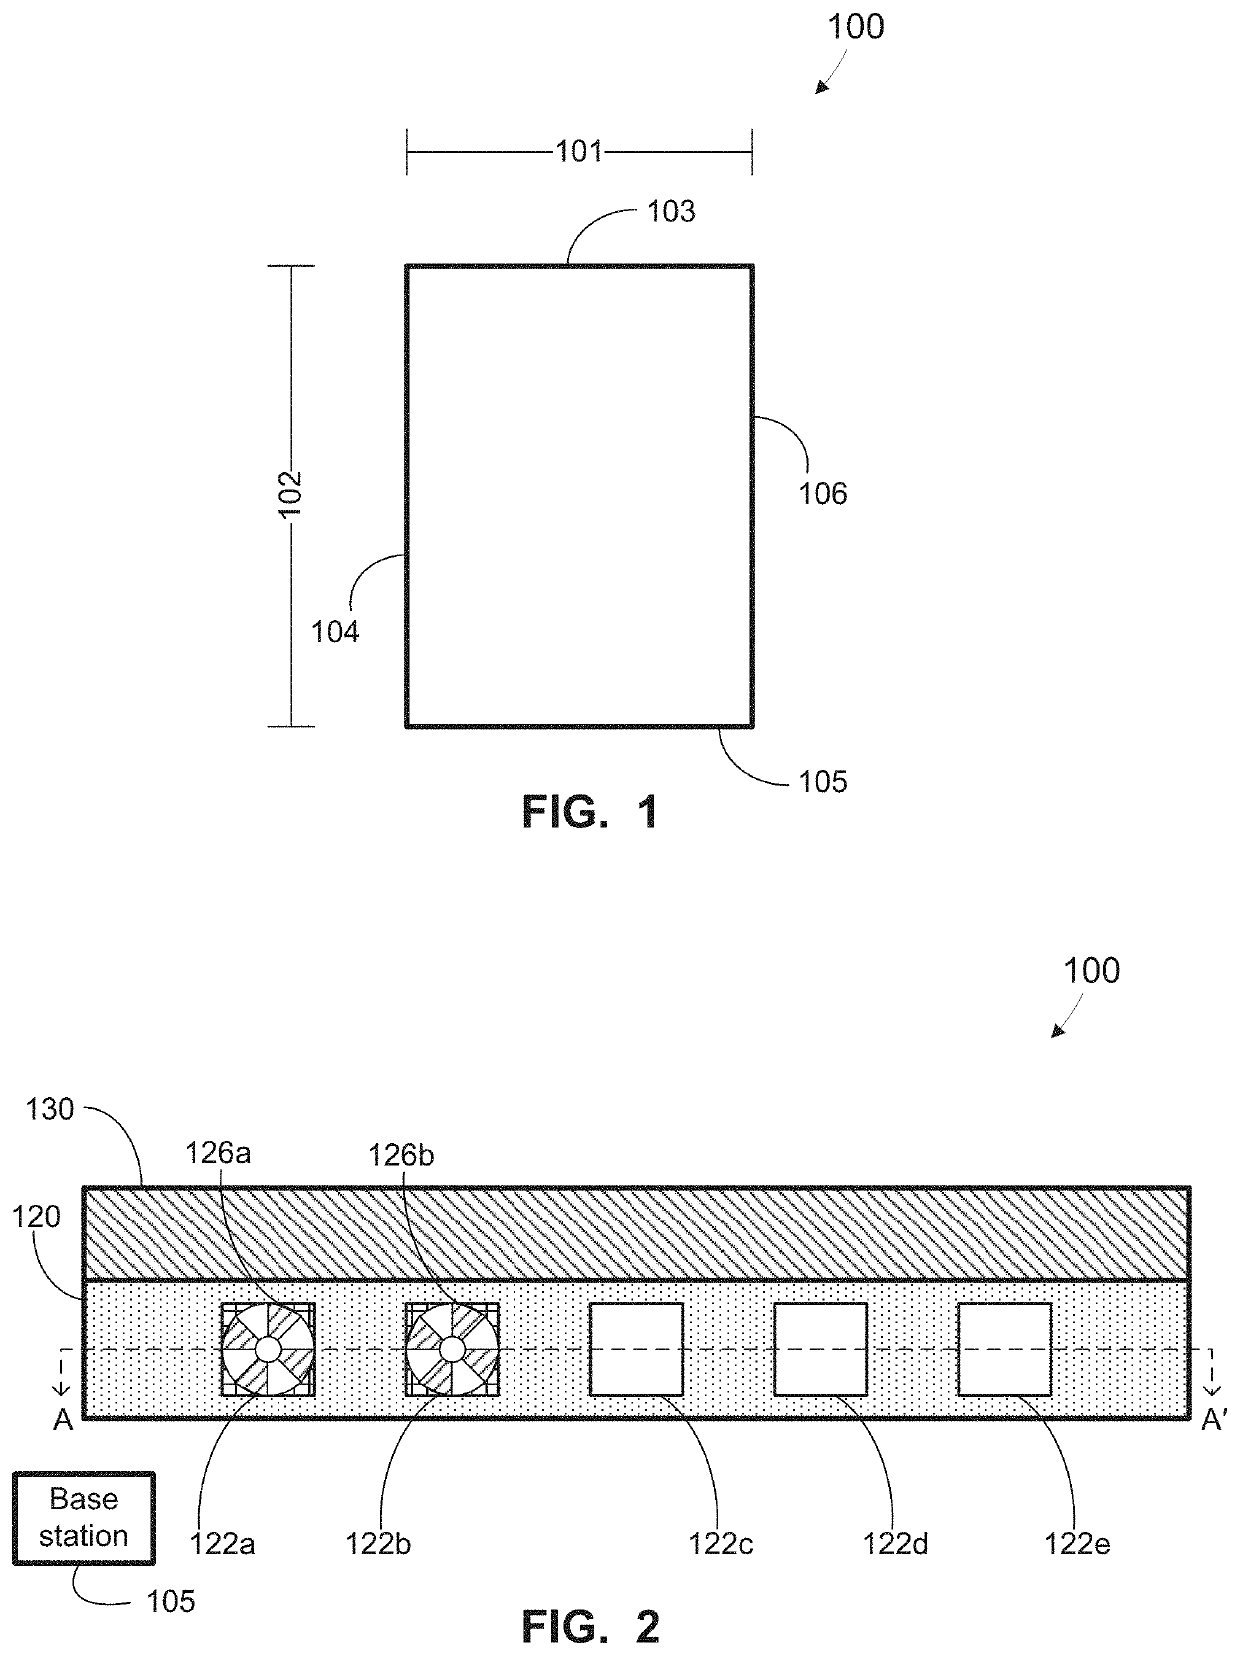 Mattress system comprising one or more electronic devices configured for smart home control